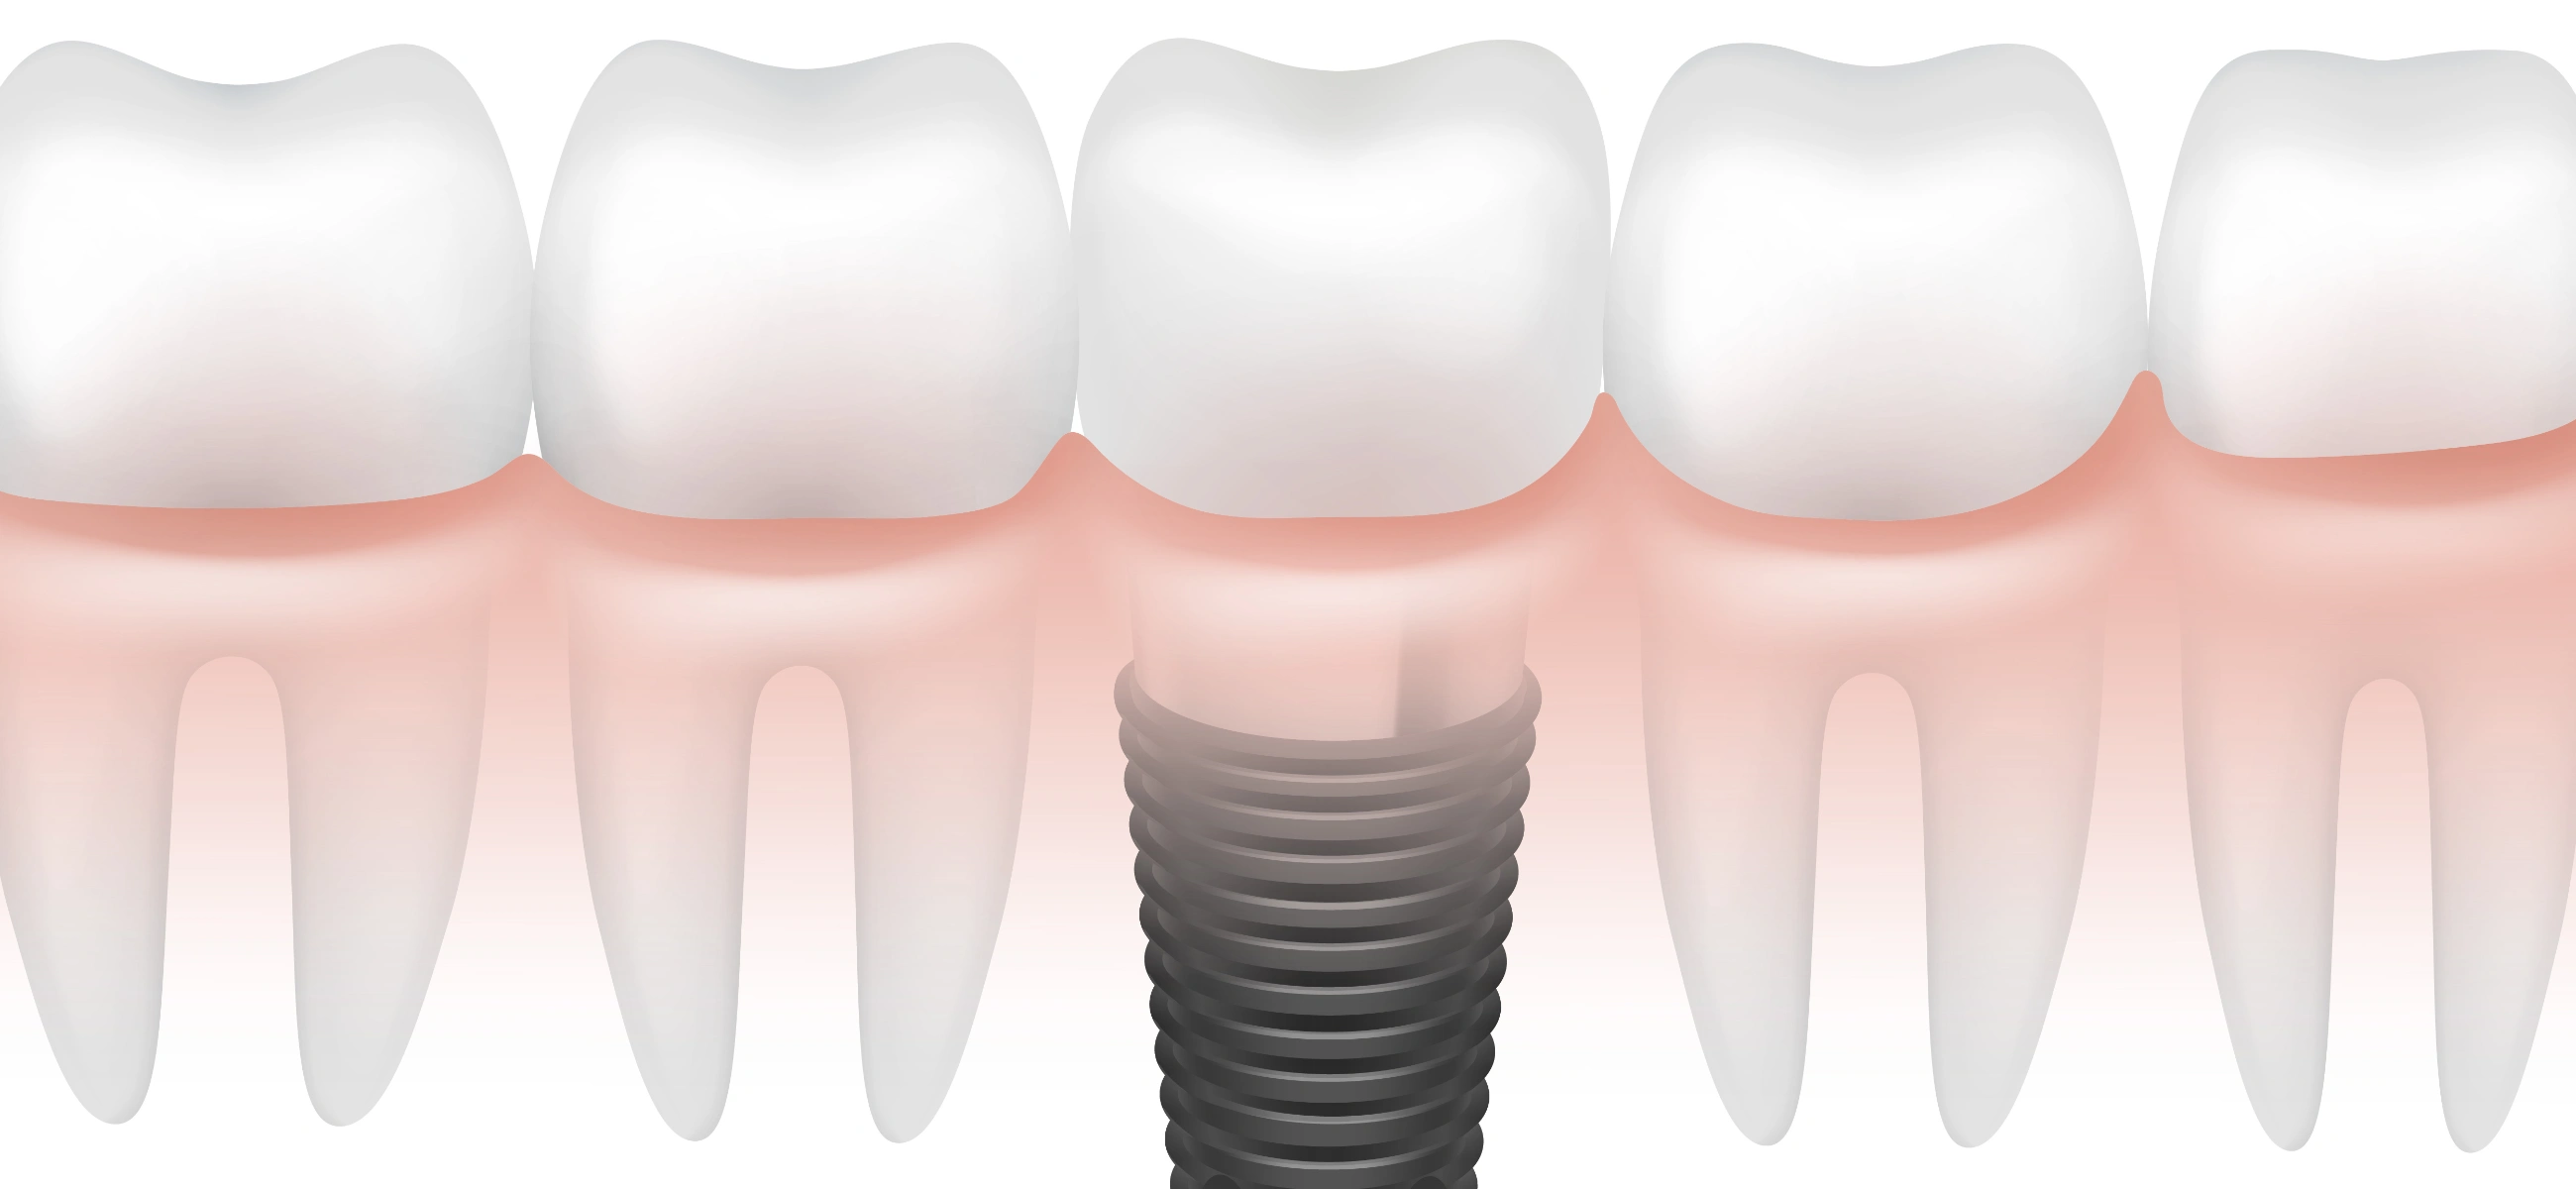 Dental implants VS dentures: Which is better for you?